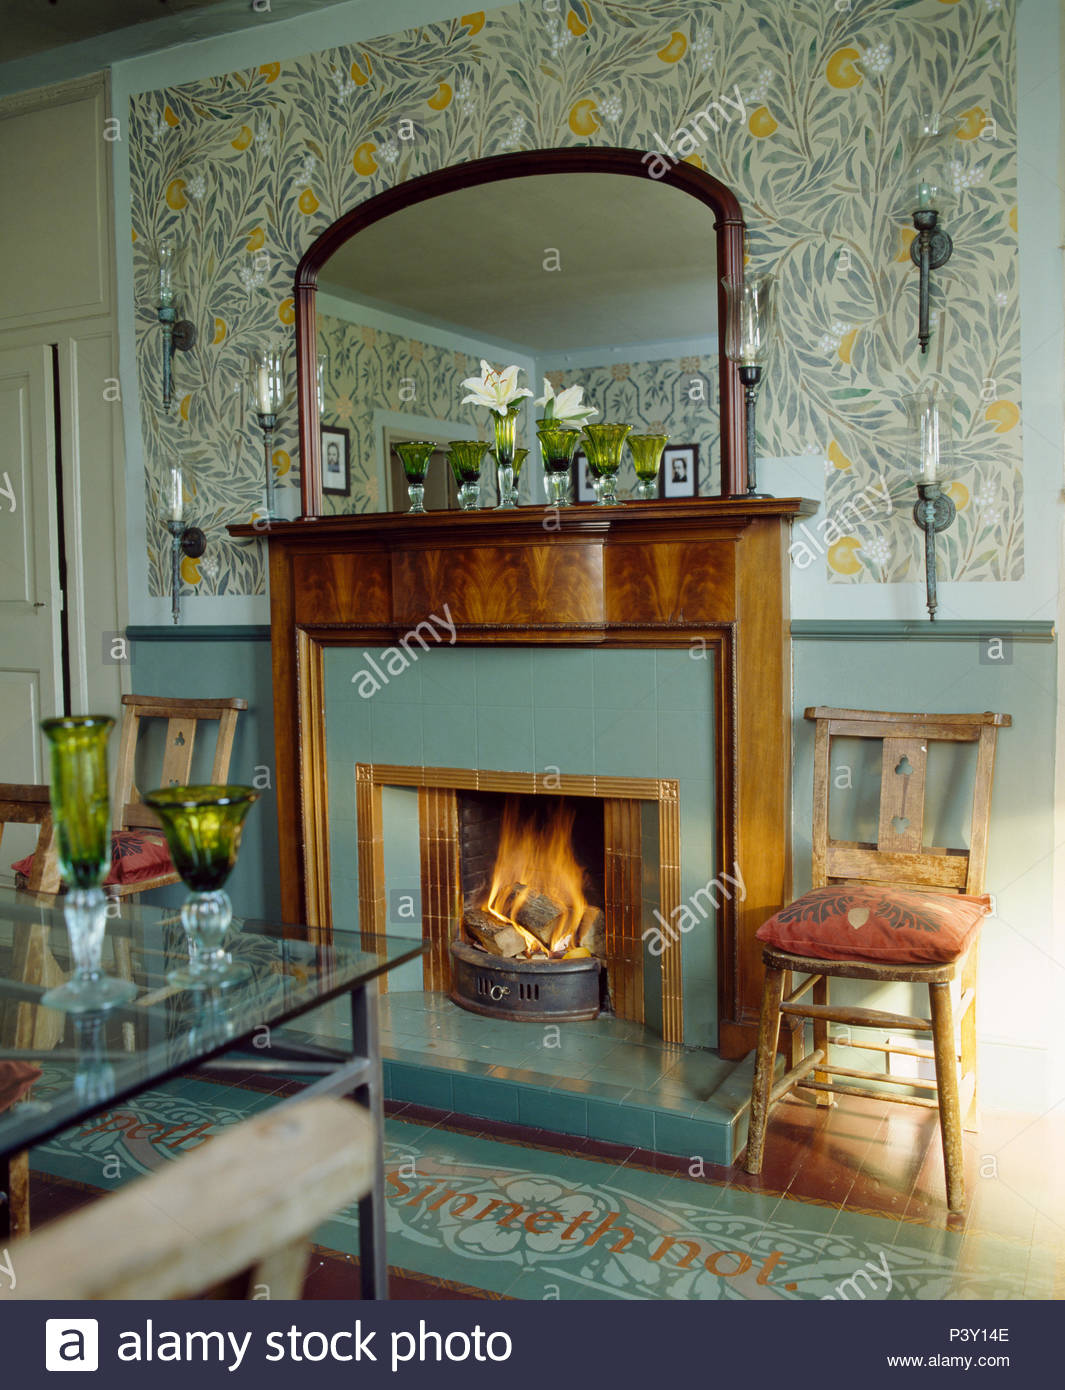 stencilled artscrafts pattern on wall above fireplace with lighted fire in country dining room P3Y14E